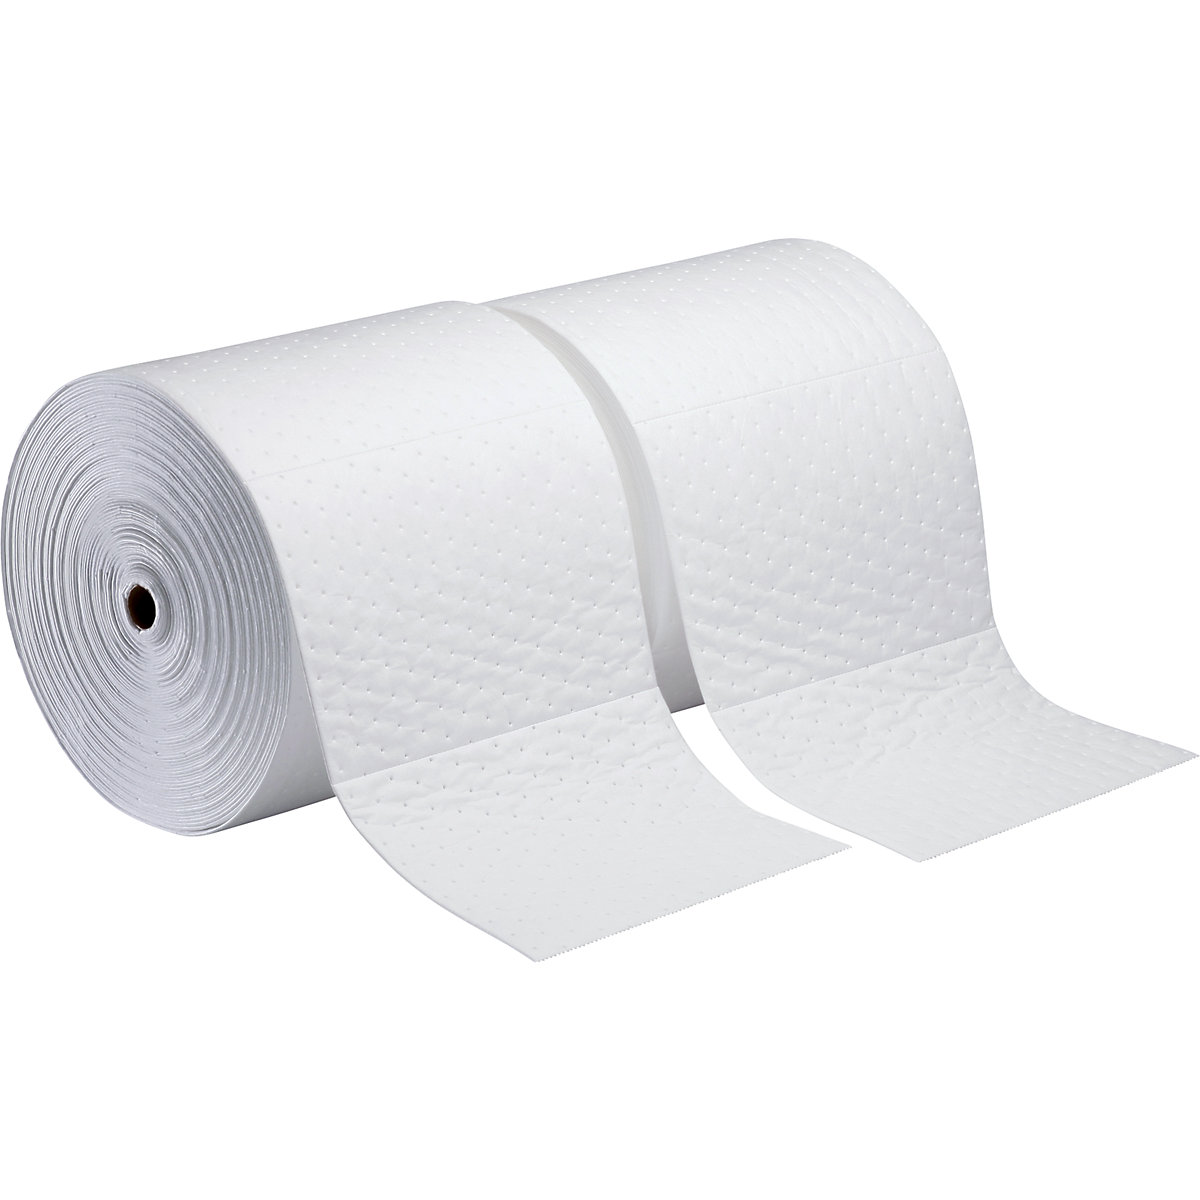 Oil-Only absorbent sheeting roll - PIG